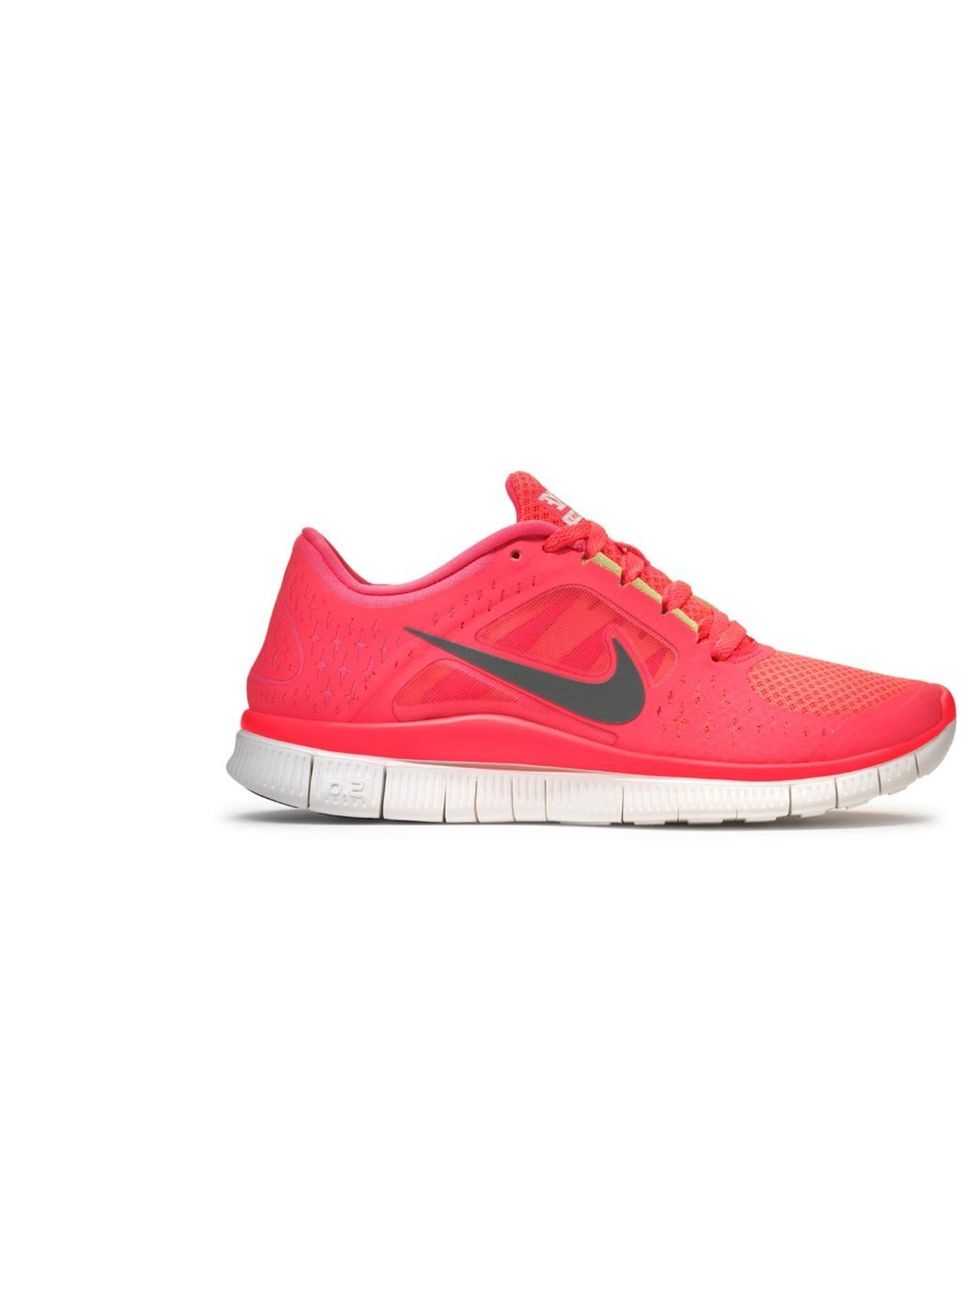 <p><strong><a href="http://store.nike.com/gb/en_gb/">Nike</a> Free Run +3, £80 or £95 for iD</strong></p><p><strong>Weight:</strong> around 198g for the pair</p><p><strong>Pros:</strong> The laces tie up at a slight angle for an extra snug, glove-like fit